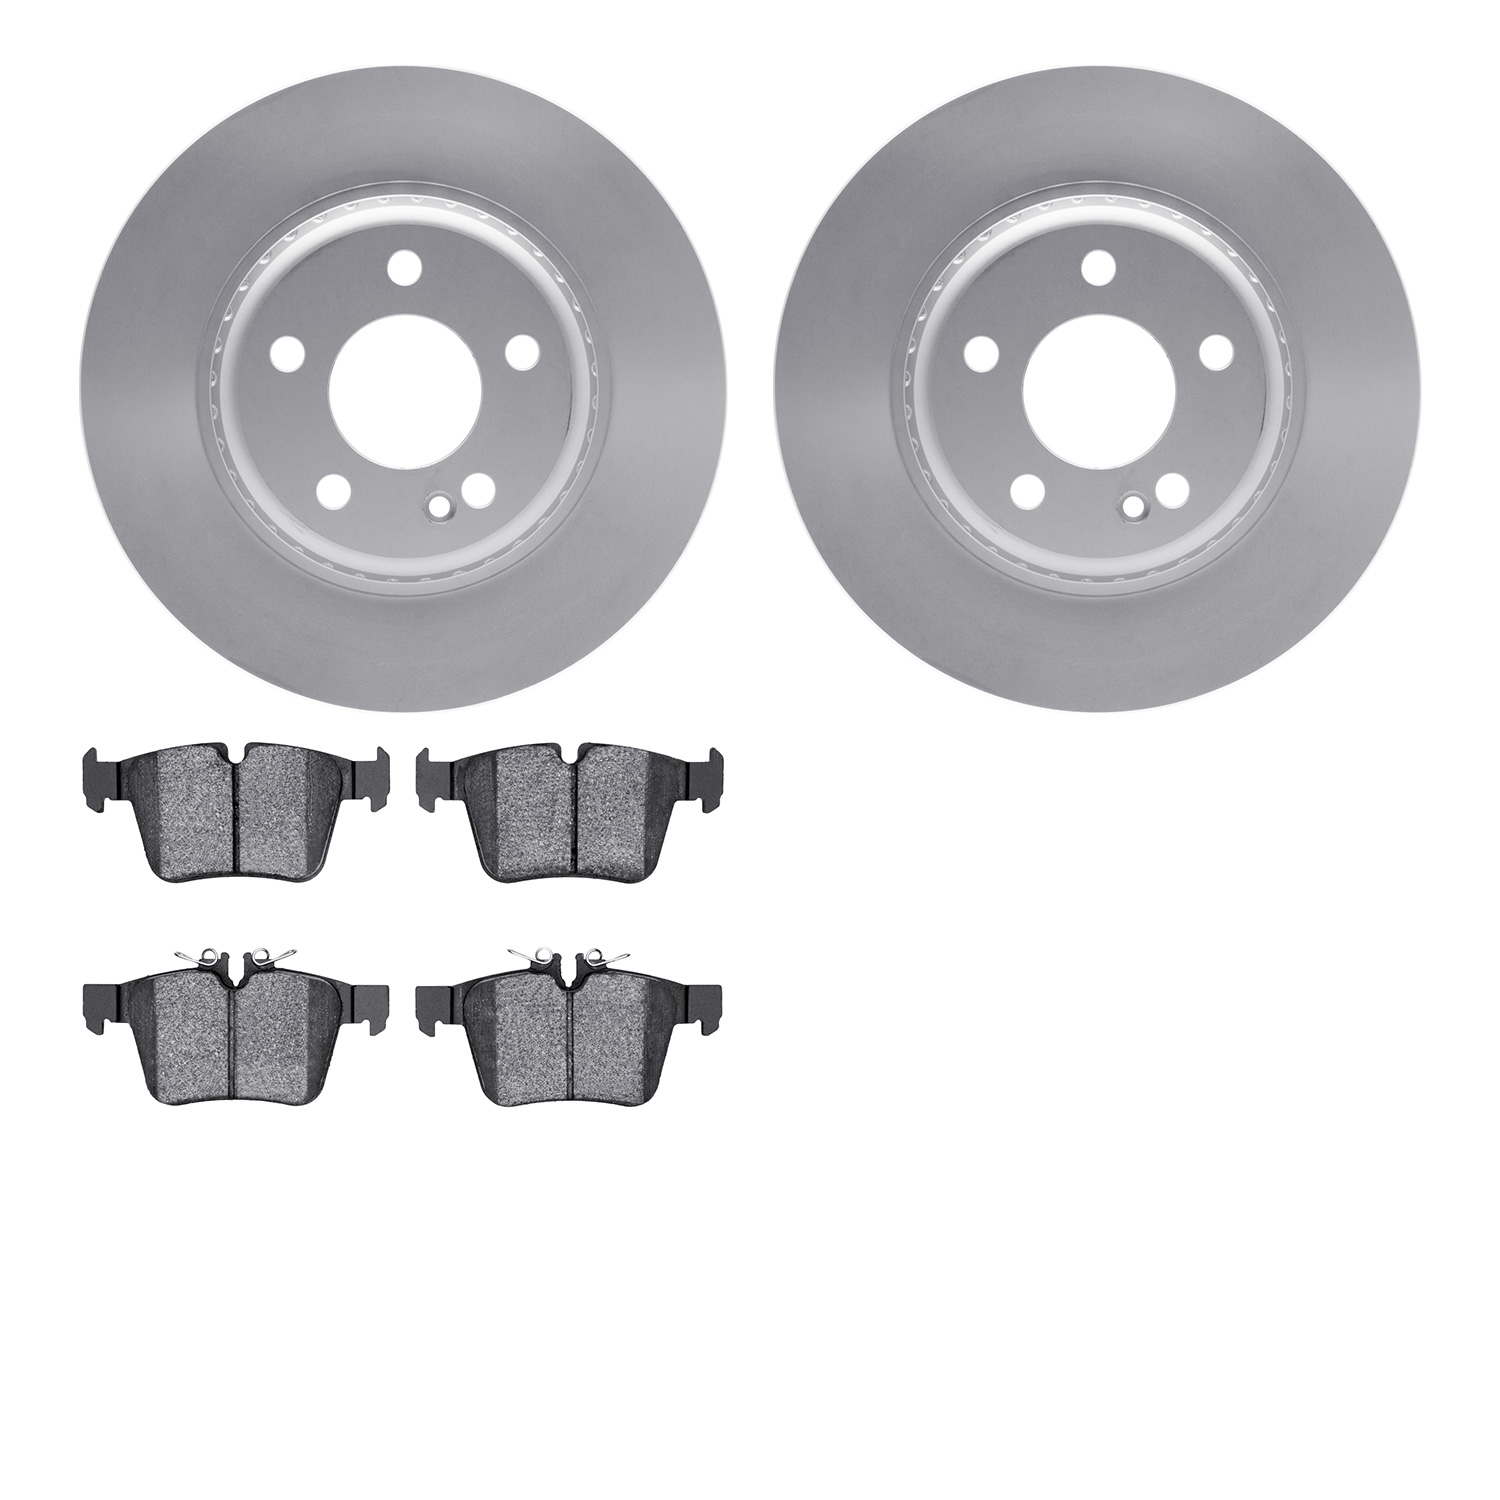 4302-63079 Geospec Brake Rotors with 3000-Series Ceramic Brake Pads Kit, Fits Select Mercedes-Benz, Position: Rear